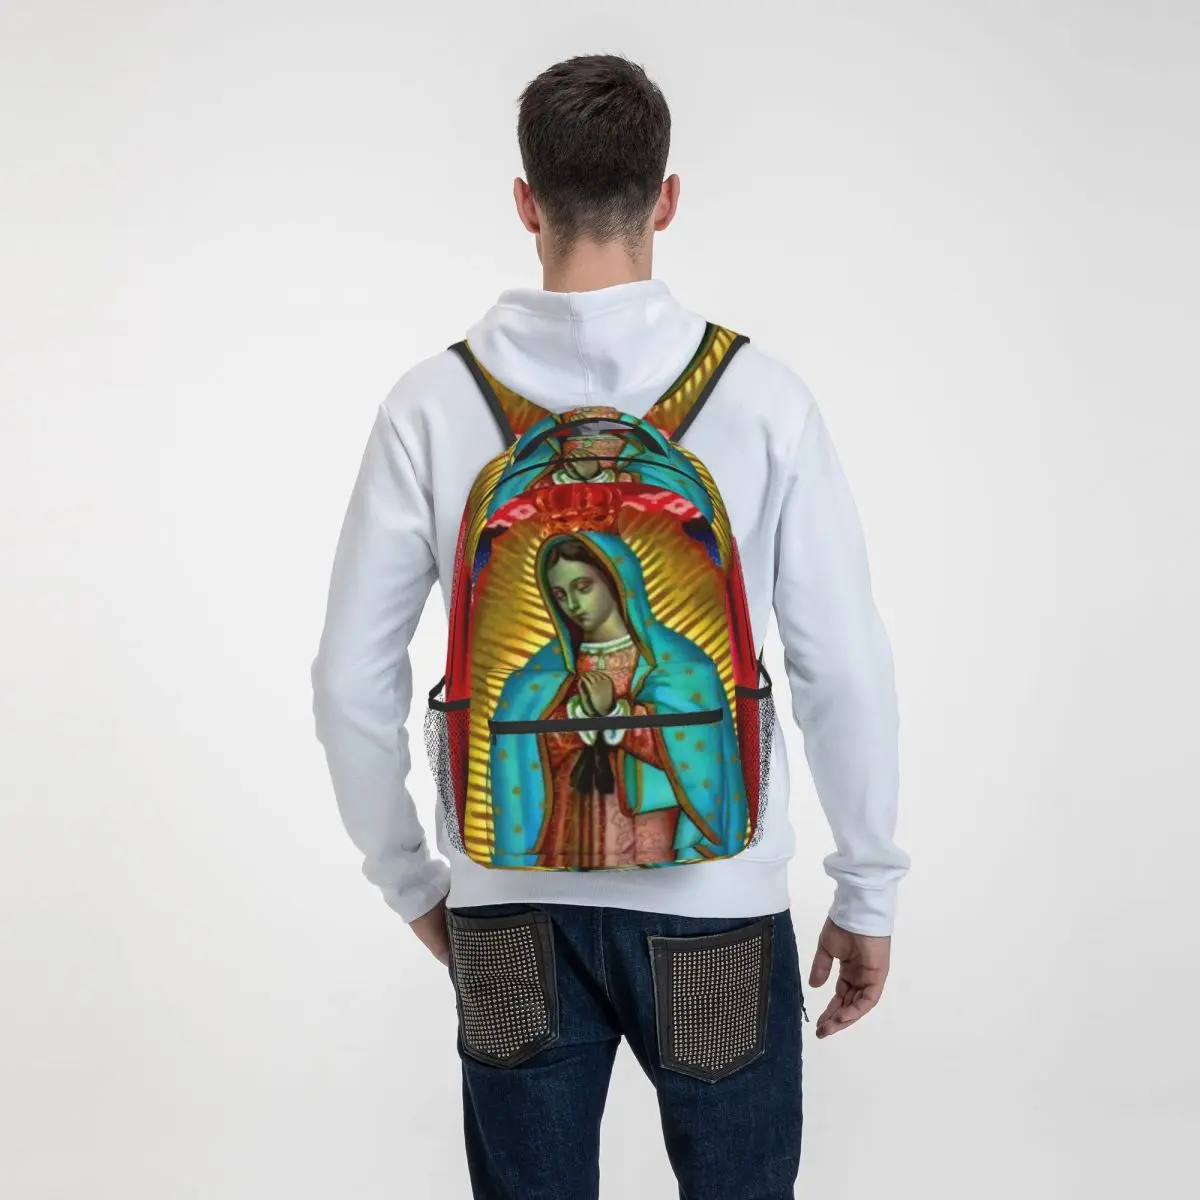 Virgin Mary Backpack Our Lady of Guadalupe Sport Backpacks Teen Fun School Bags Colorful Lightweight Rucksack images - 6